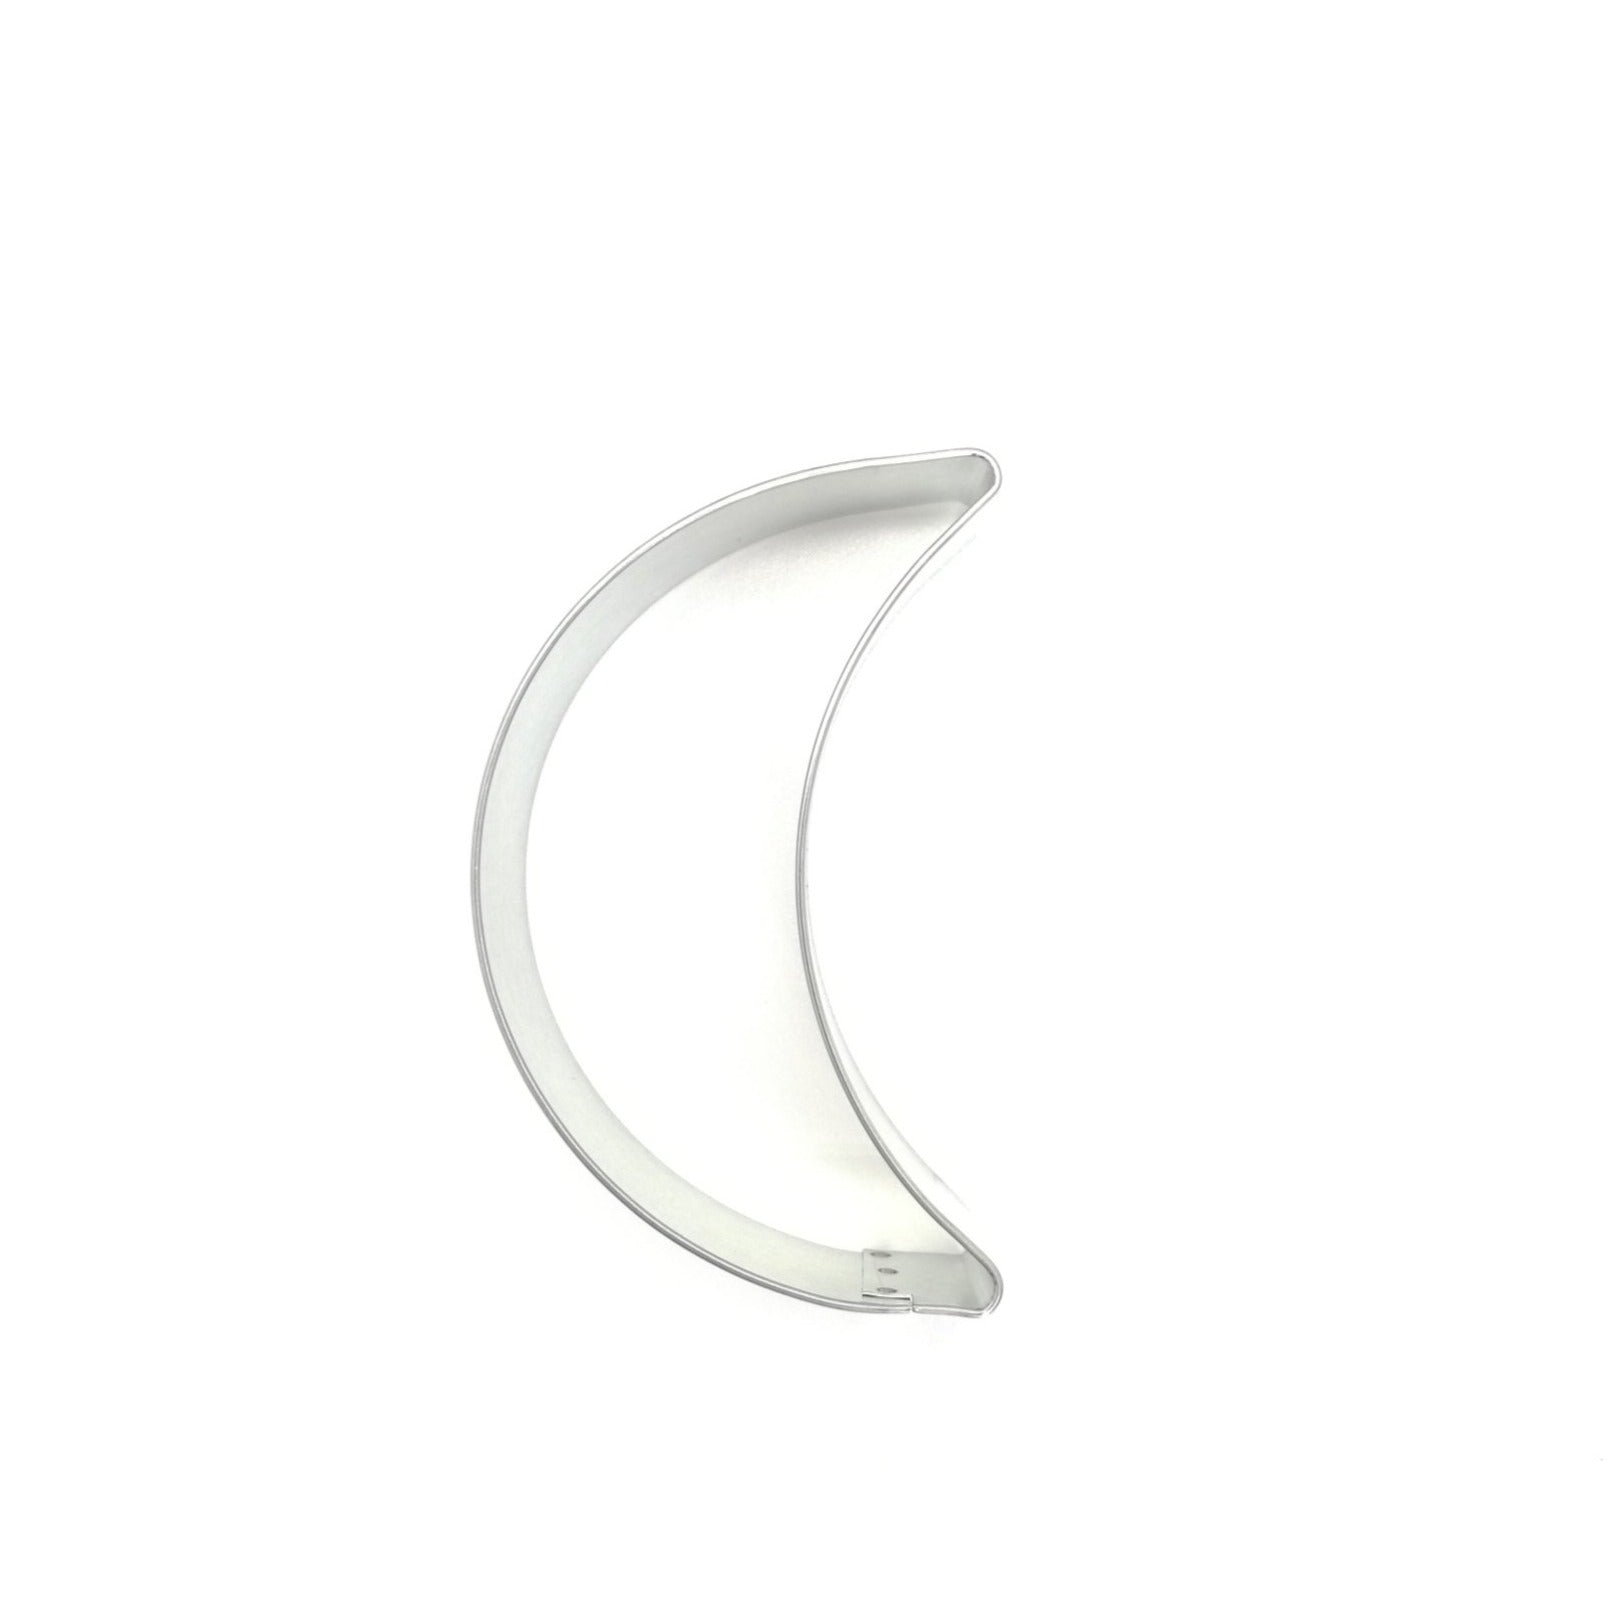 Crescent Moon Cookie Cutter - Must Love Party